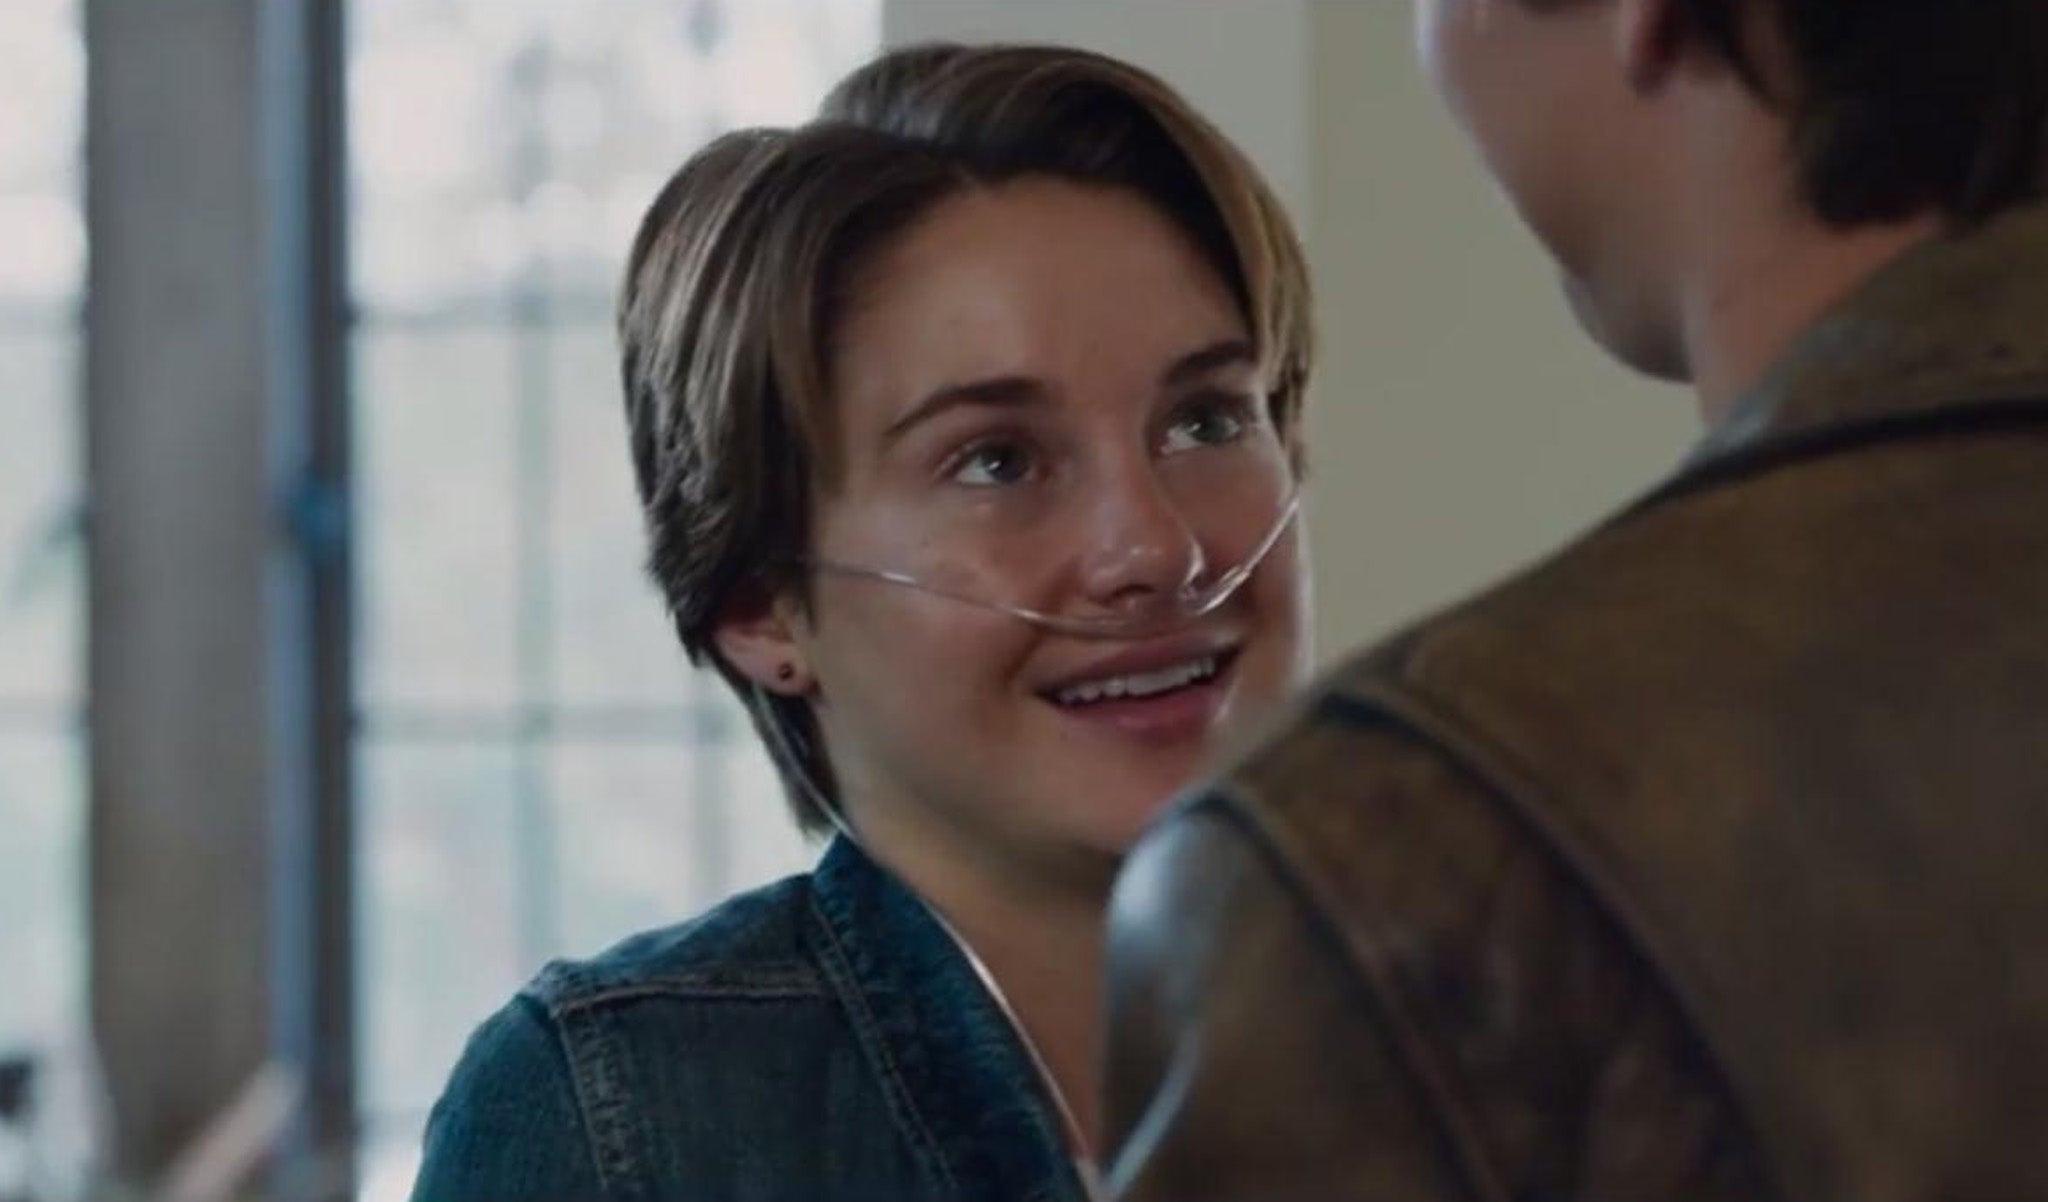 A scene from 'The Fault In Our Stars', starring Shailene Woodley as teenage cancer patient Hazel Grace Lancaster